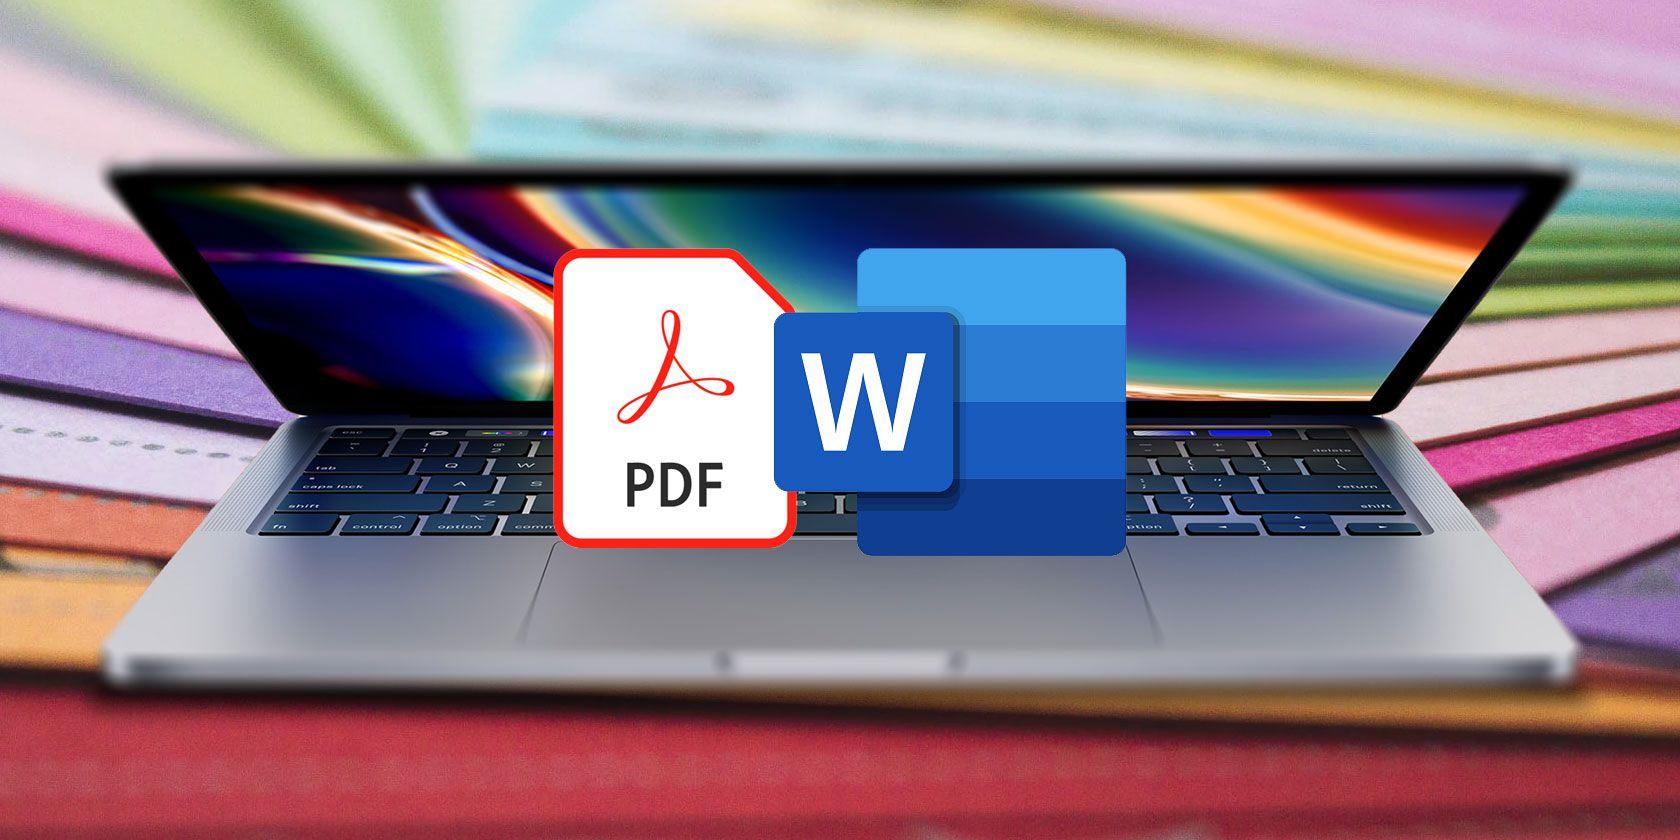 MacBook showing PDF and Word files